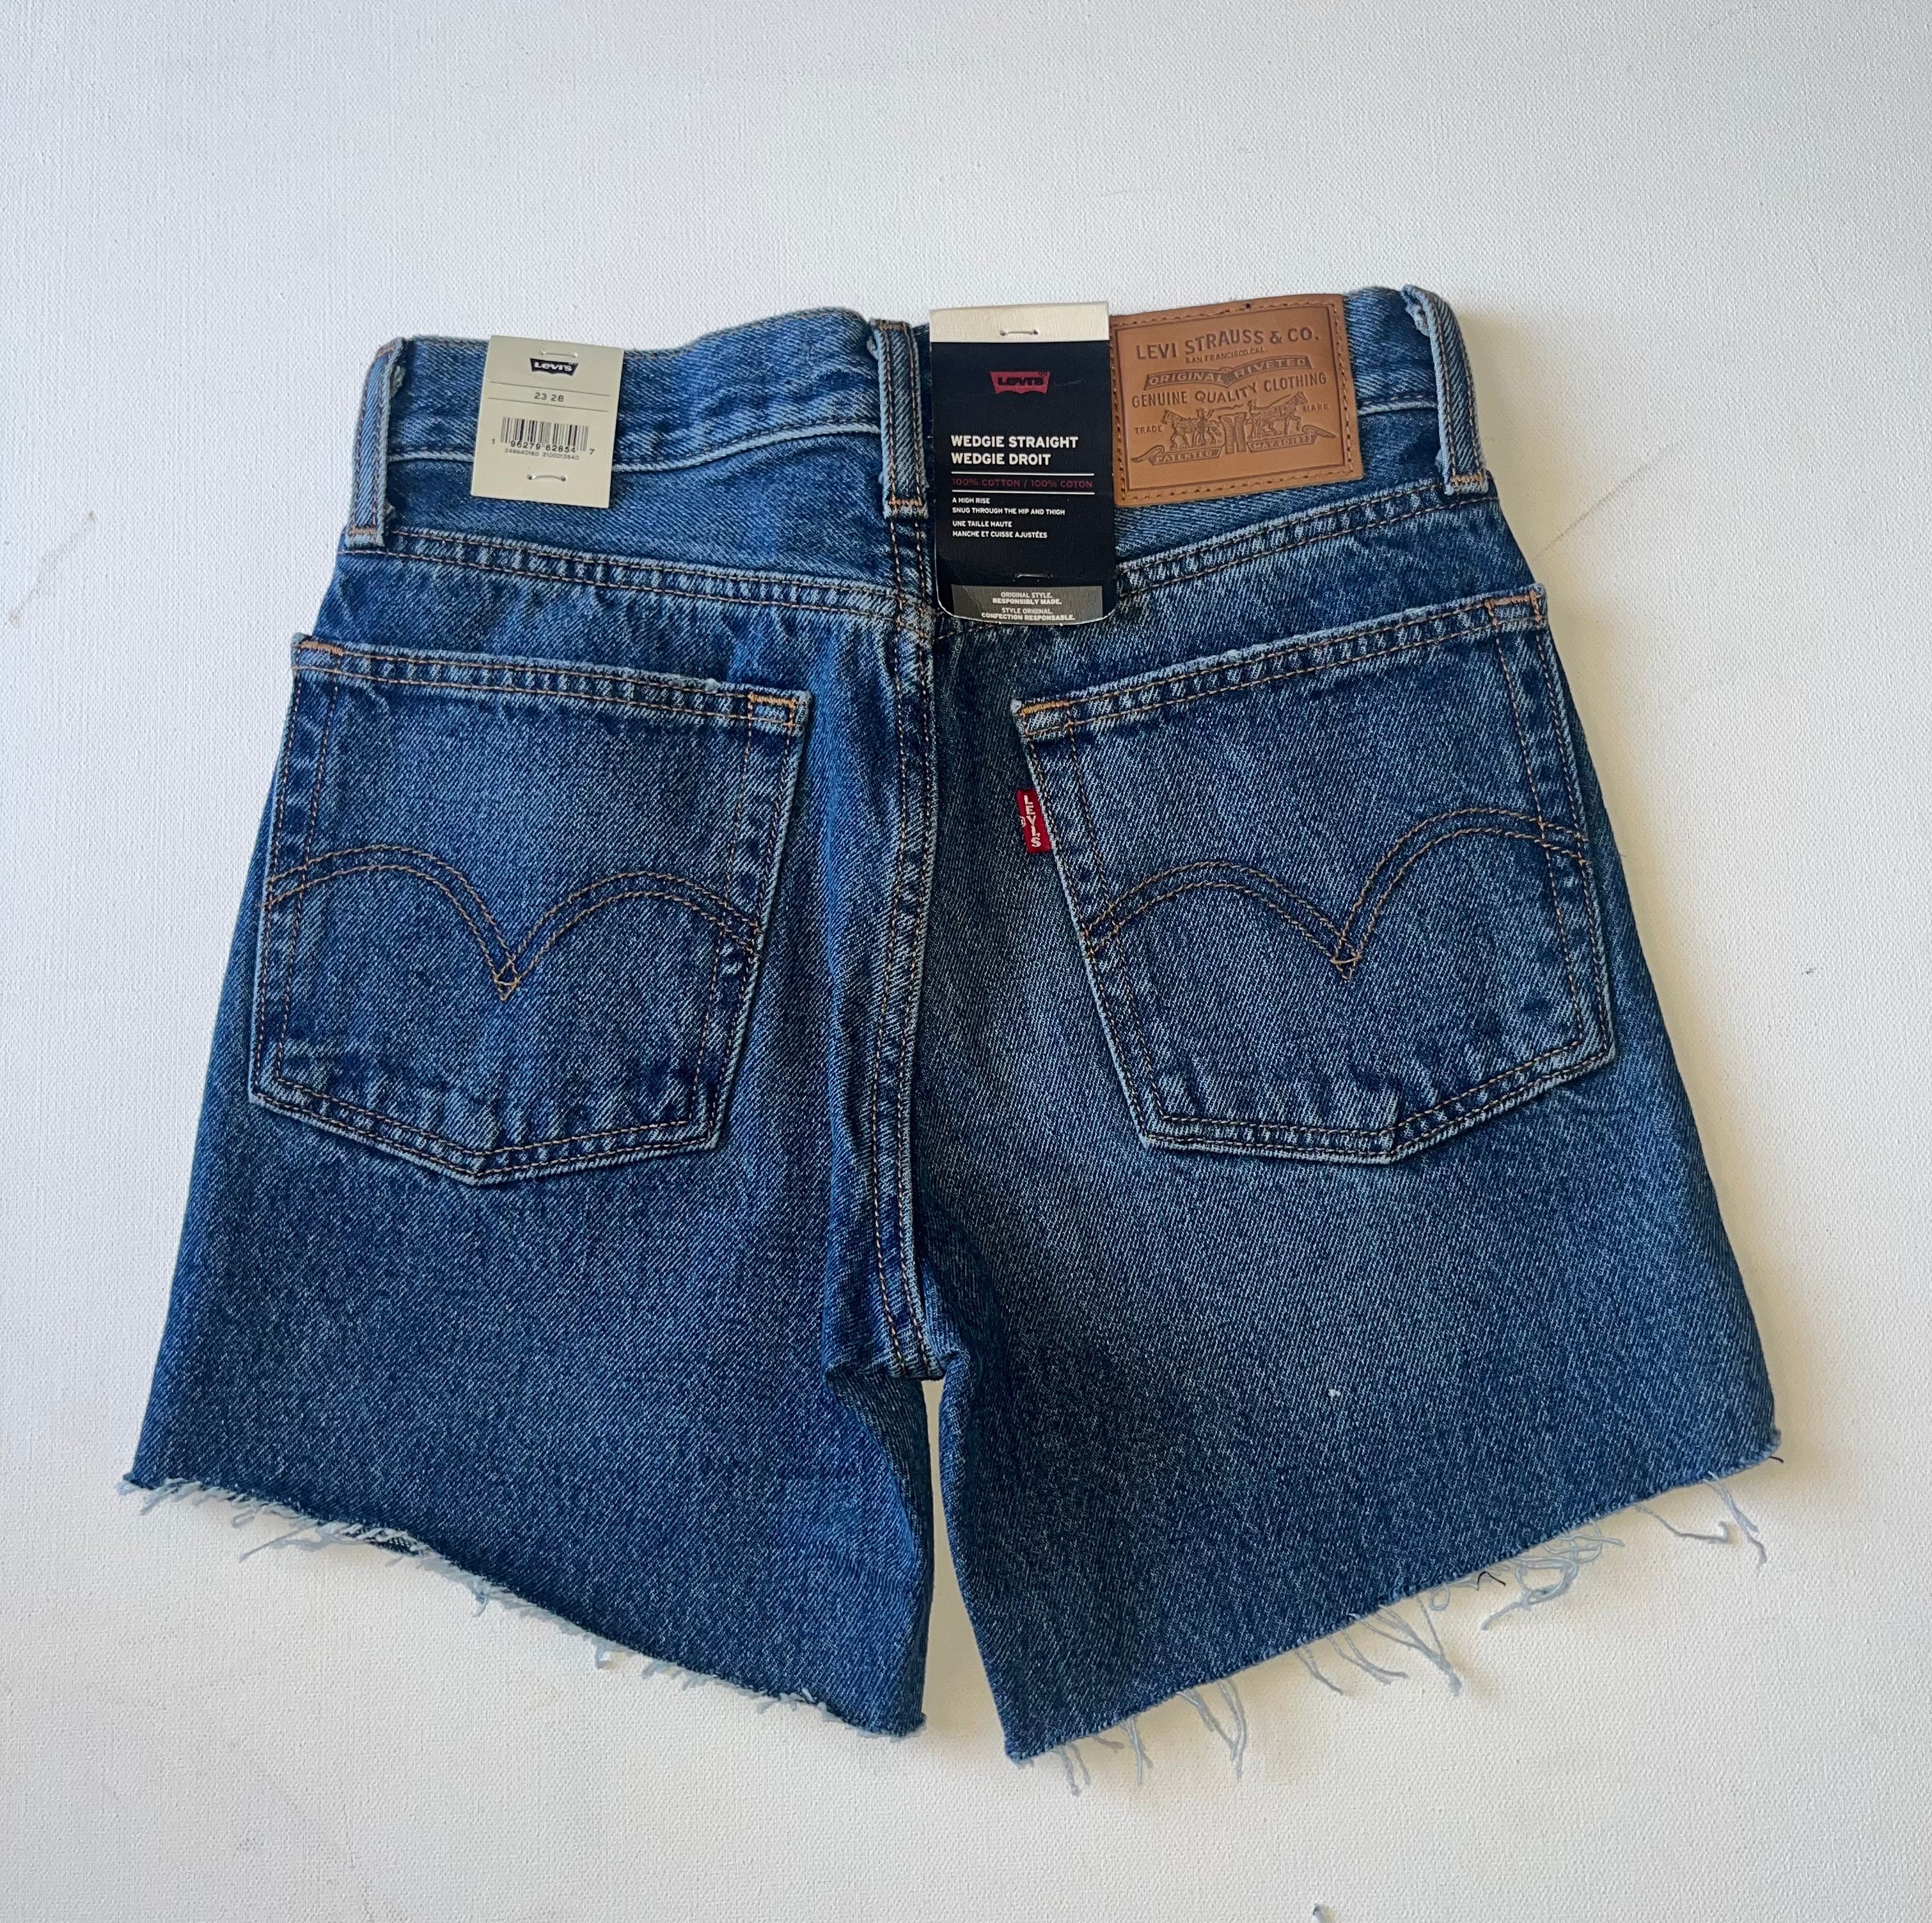 LEVI'S Wedgie Cropped Short - Carry Kerry